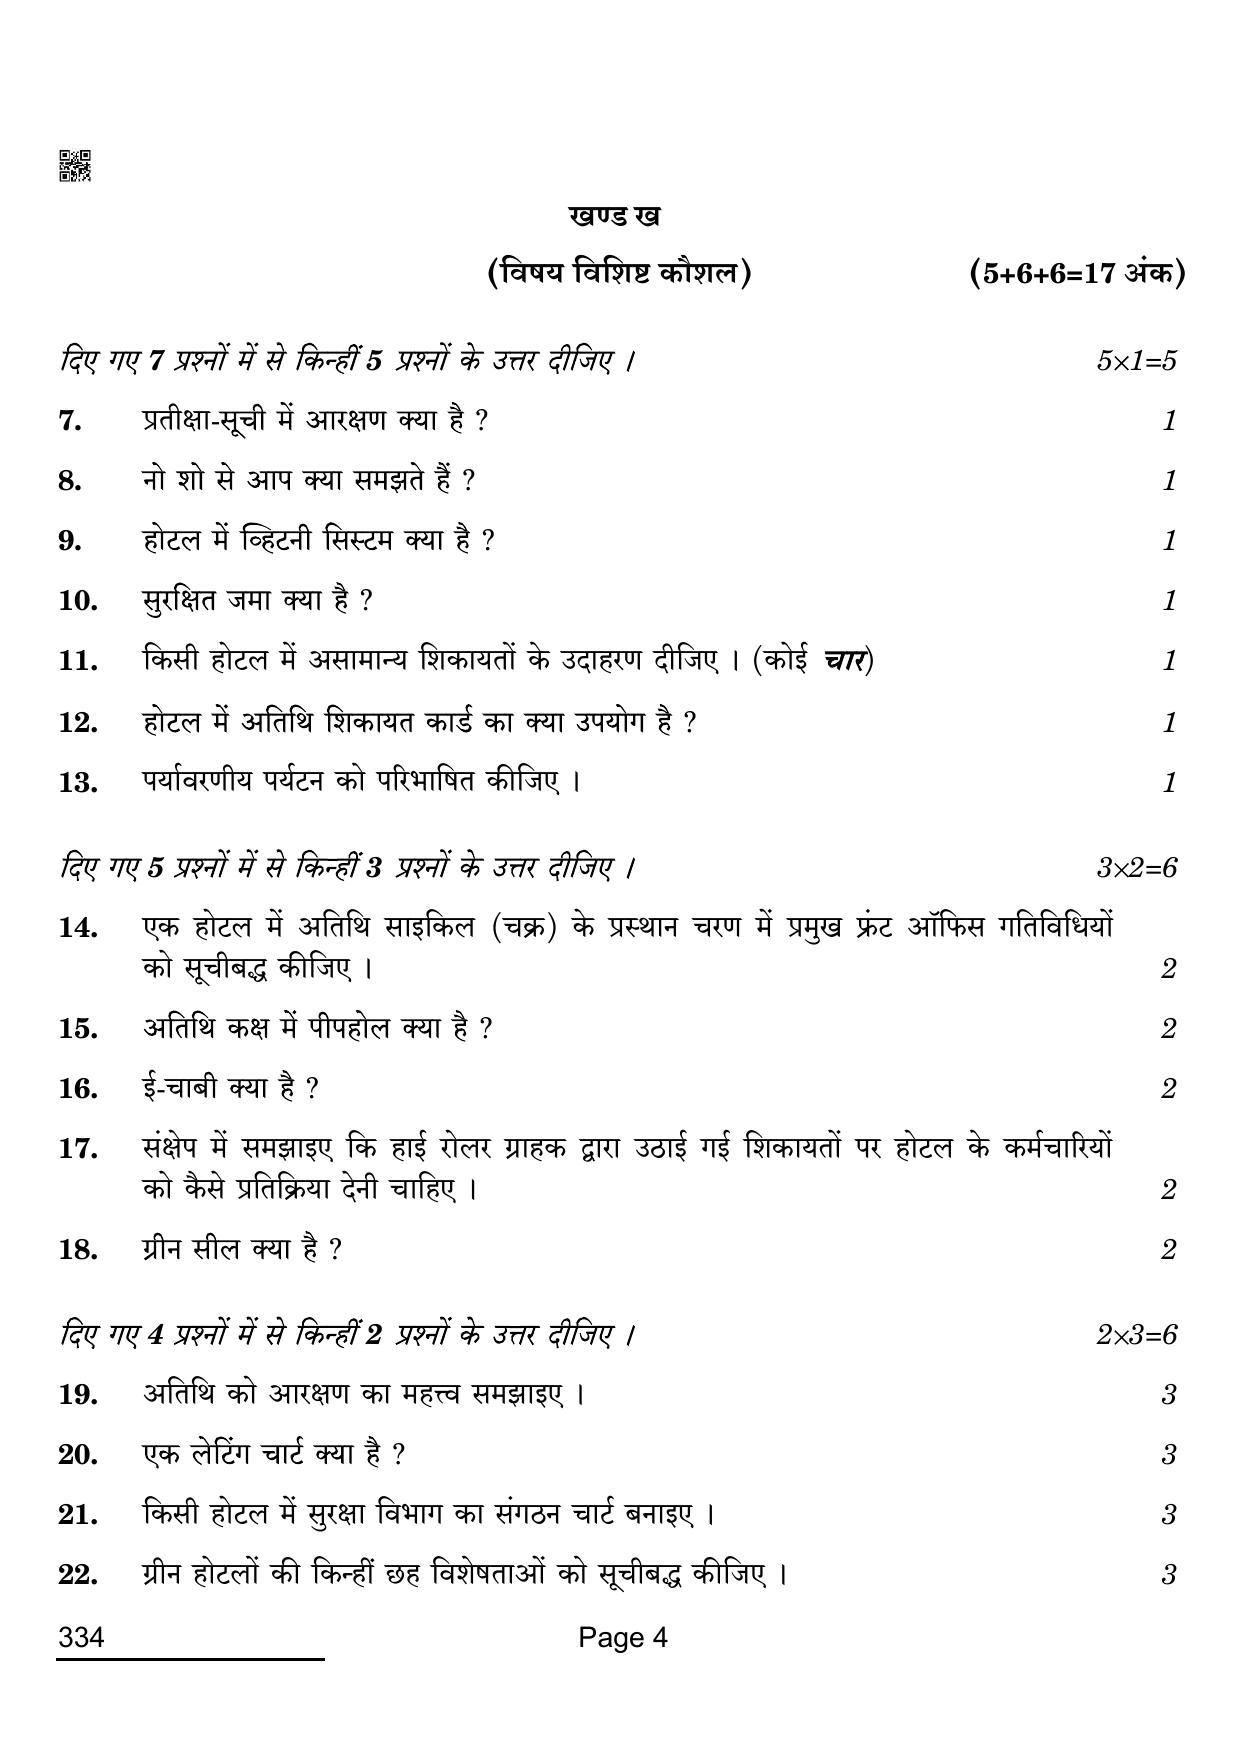 CBSE Class 12 334_Front Office Operations 2022 Question Paper - Page 4